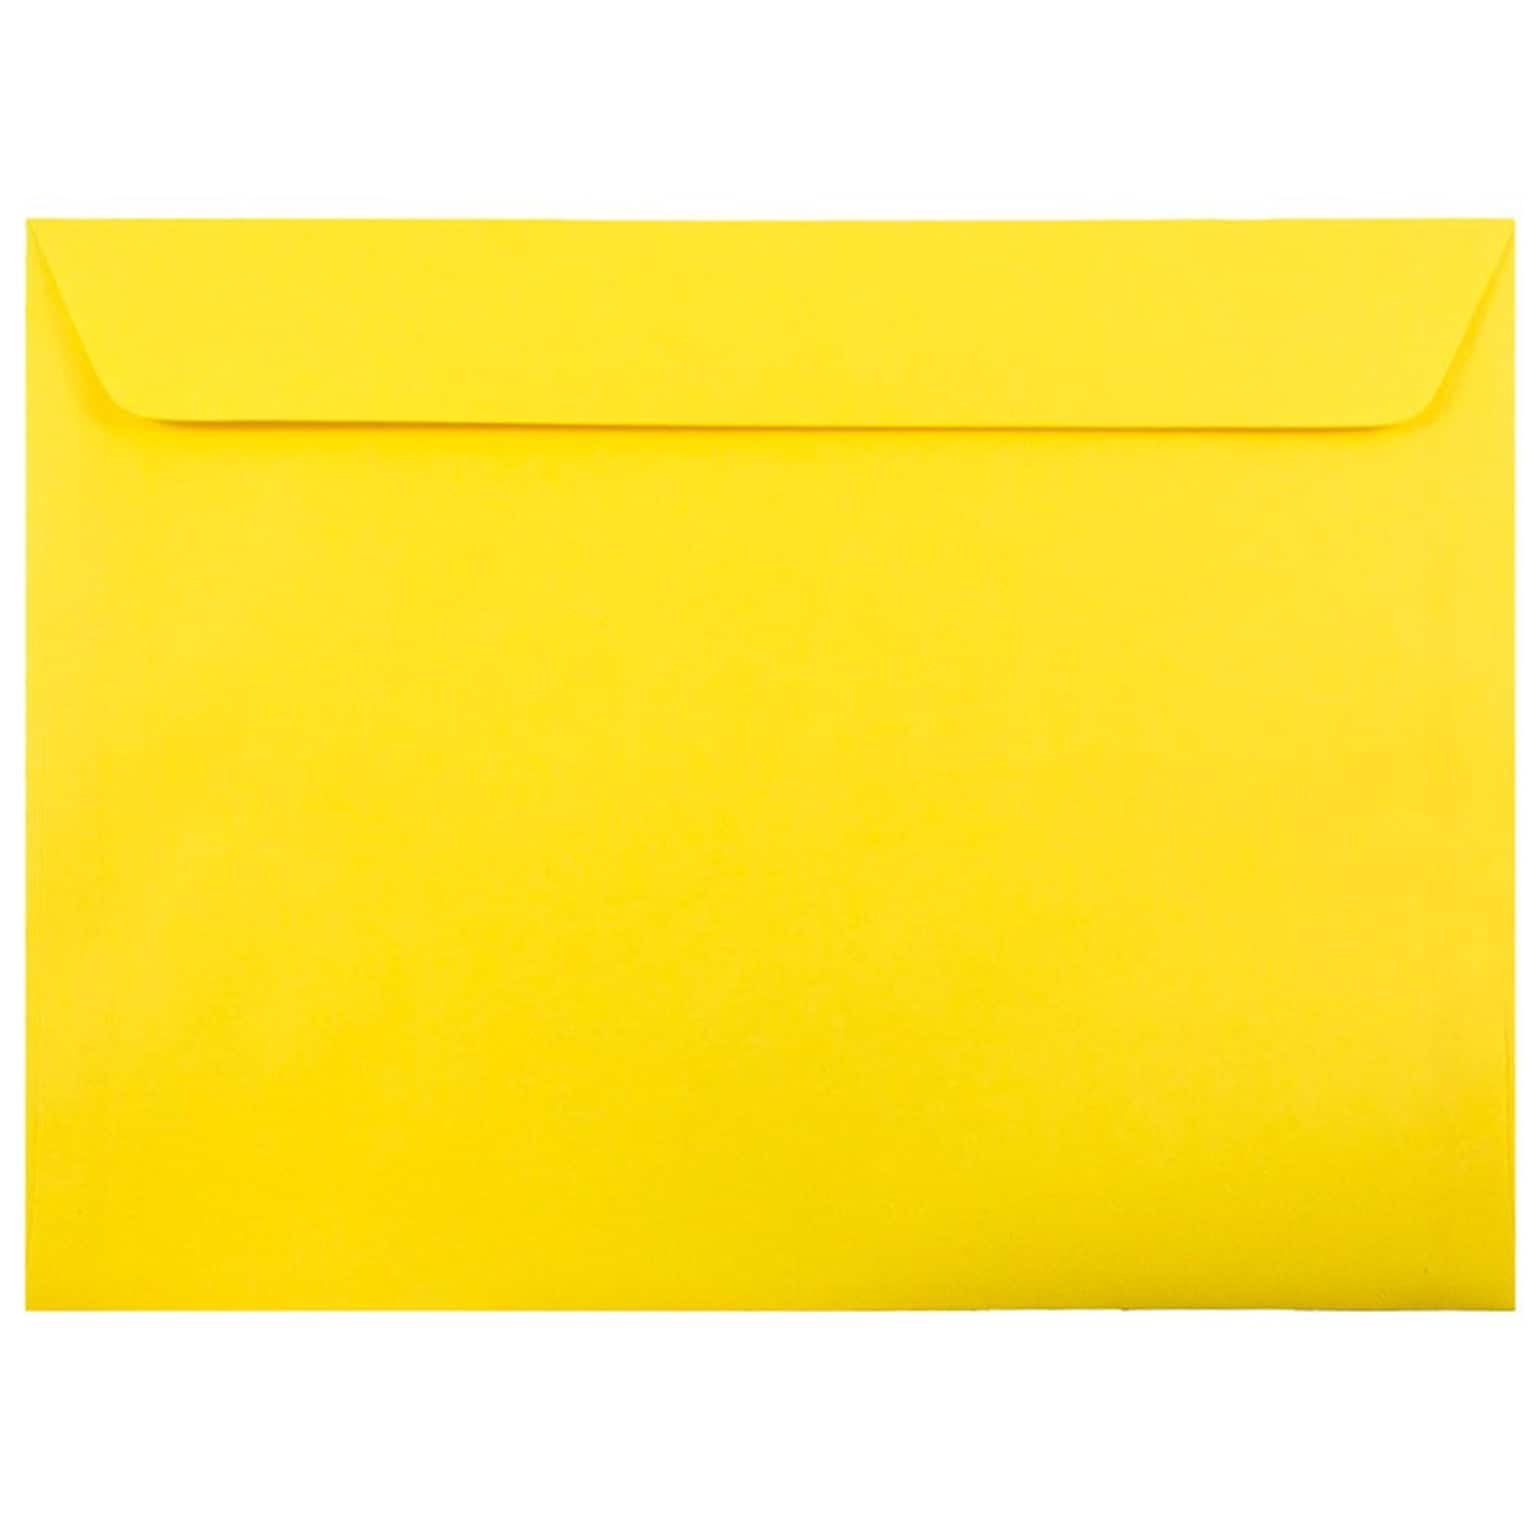 JAM Paper 9 x 12 Booklet Colored Envelopes, Yellow Recycled, Bulk 500/Box (5156775d)